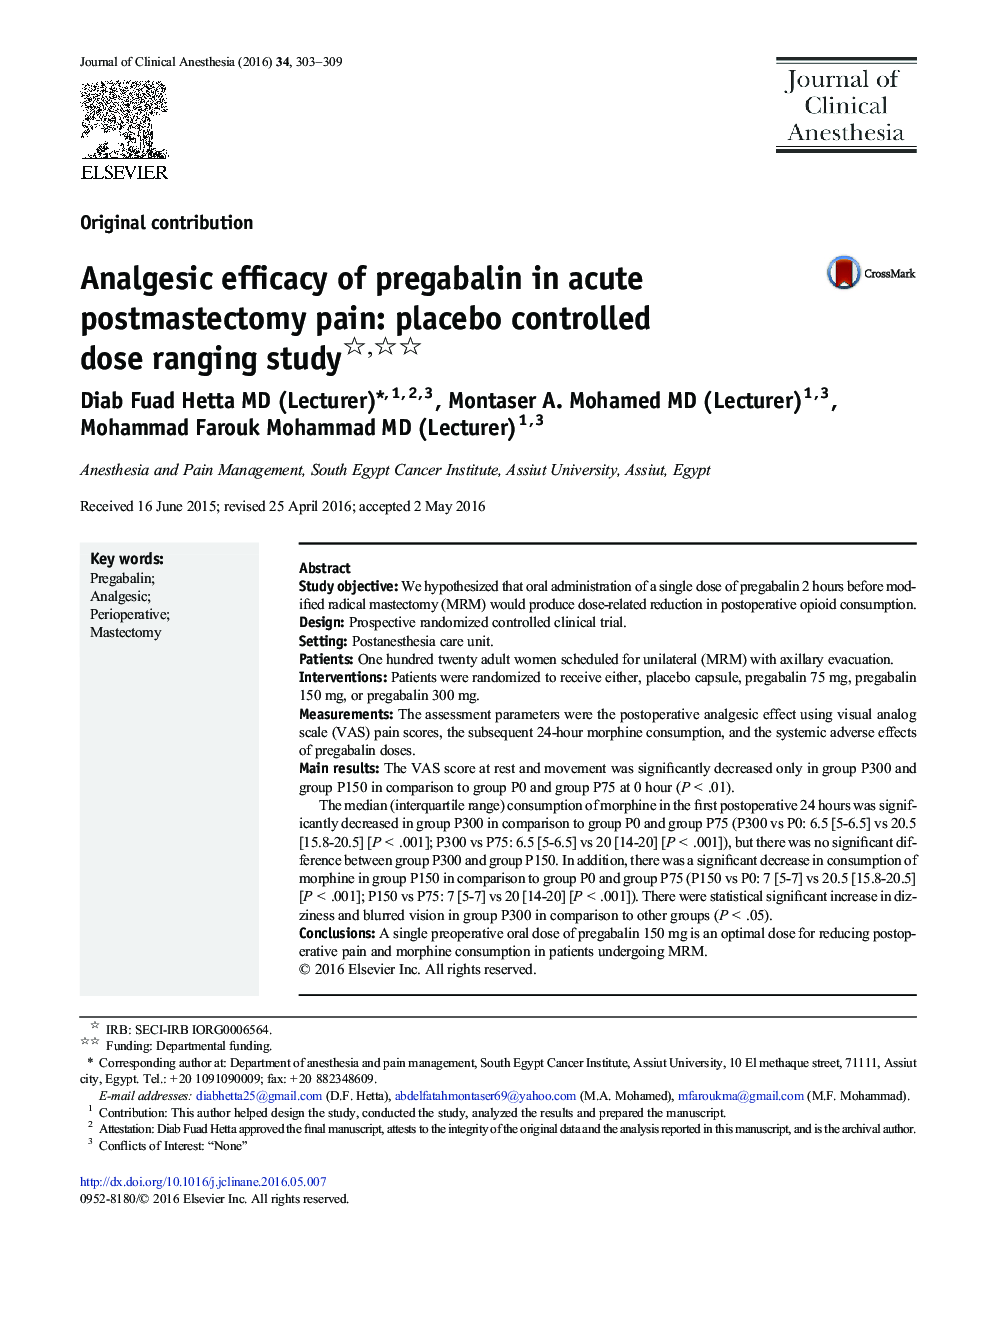 Analgesic efficacy of pregabalin in acute postmastectomy pain: placebo controlled dose ranging study